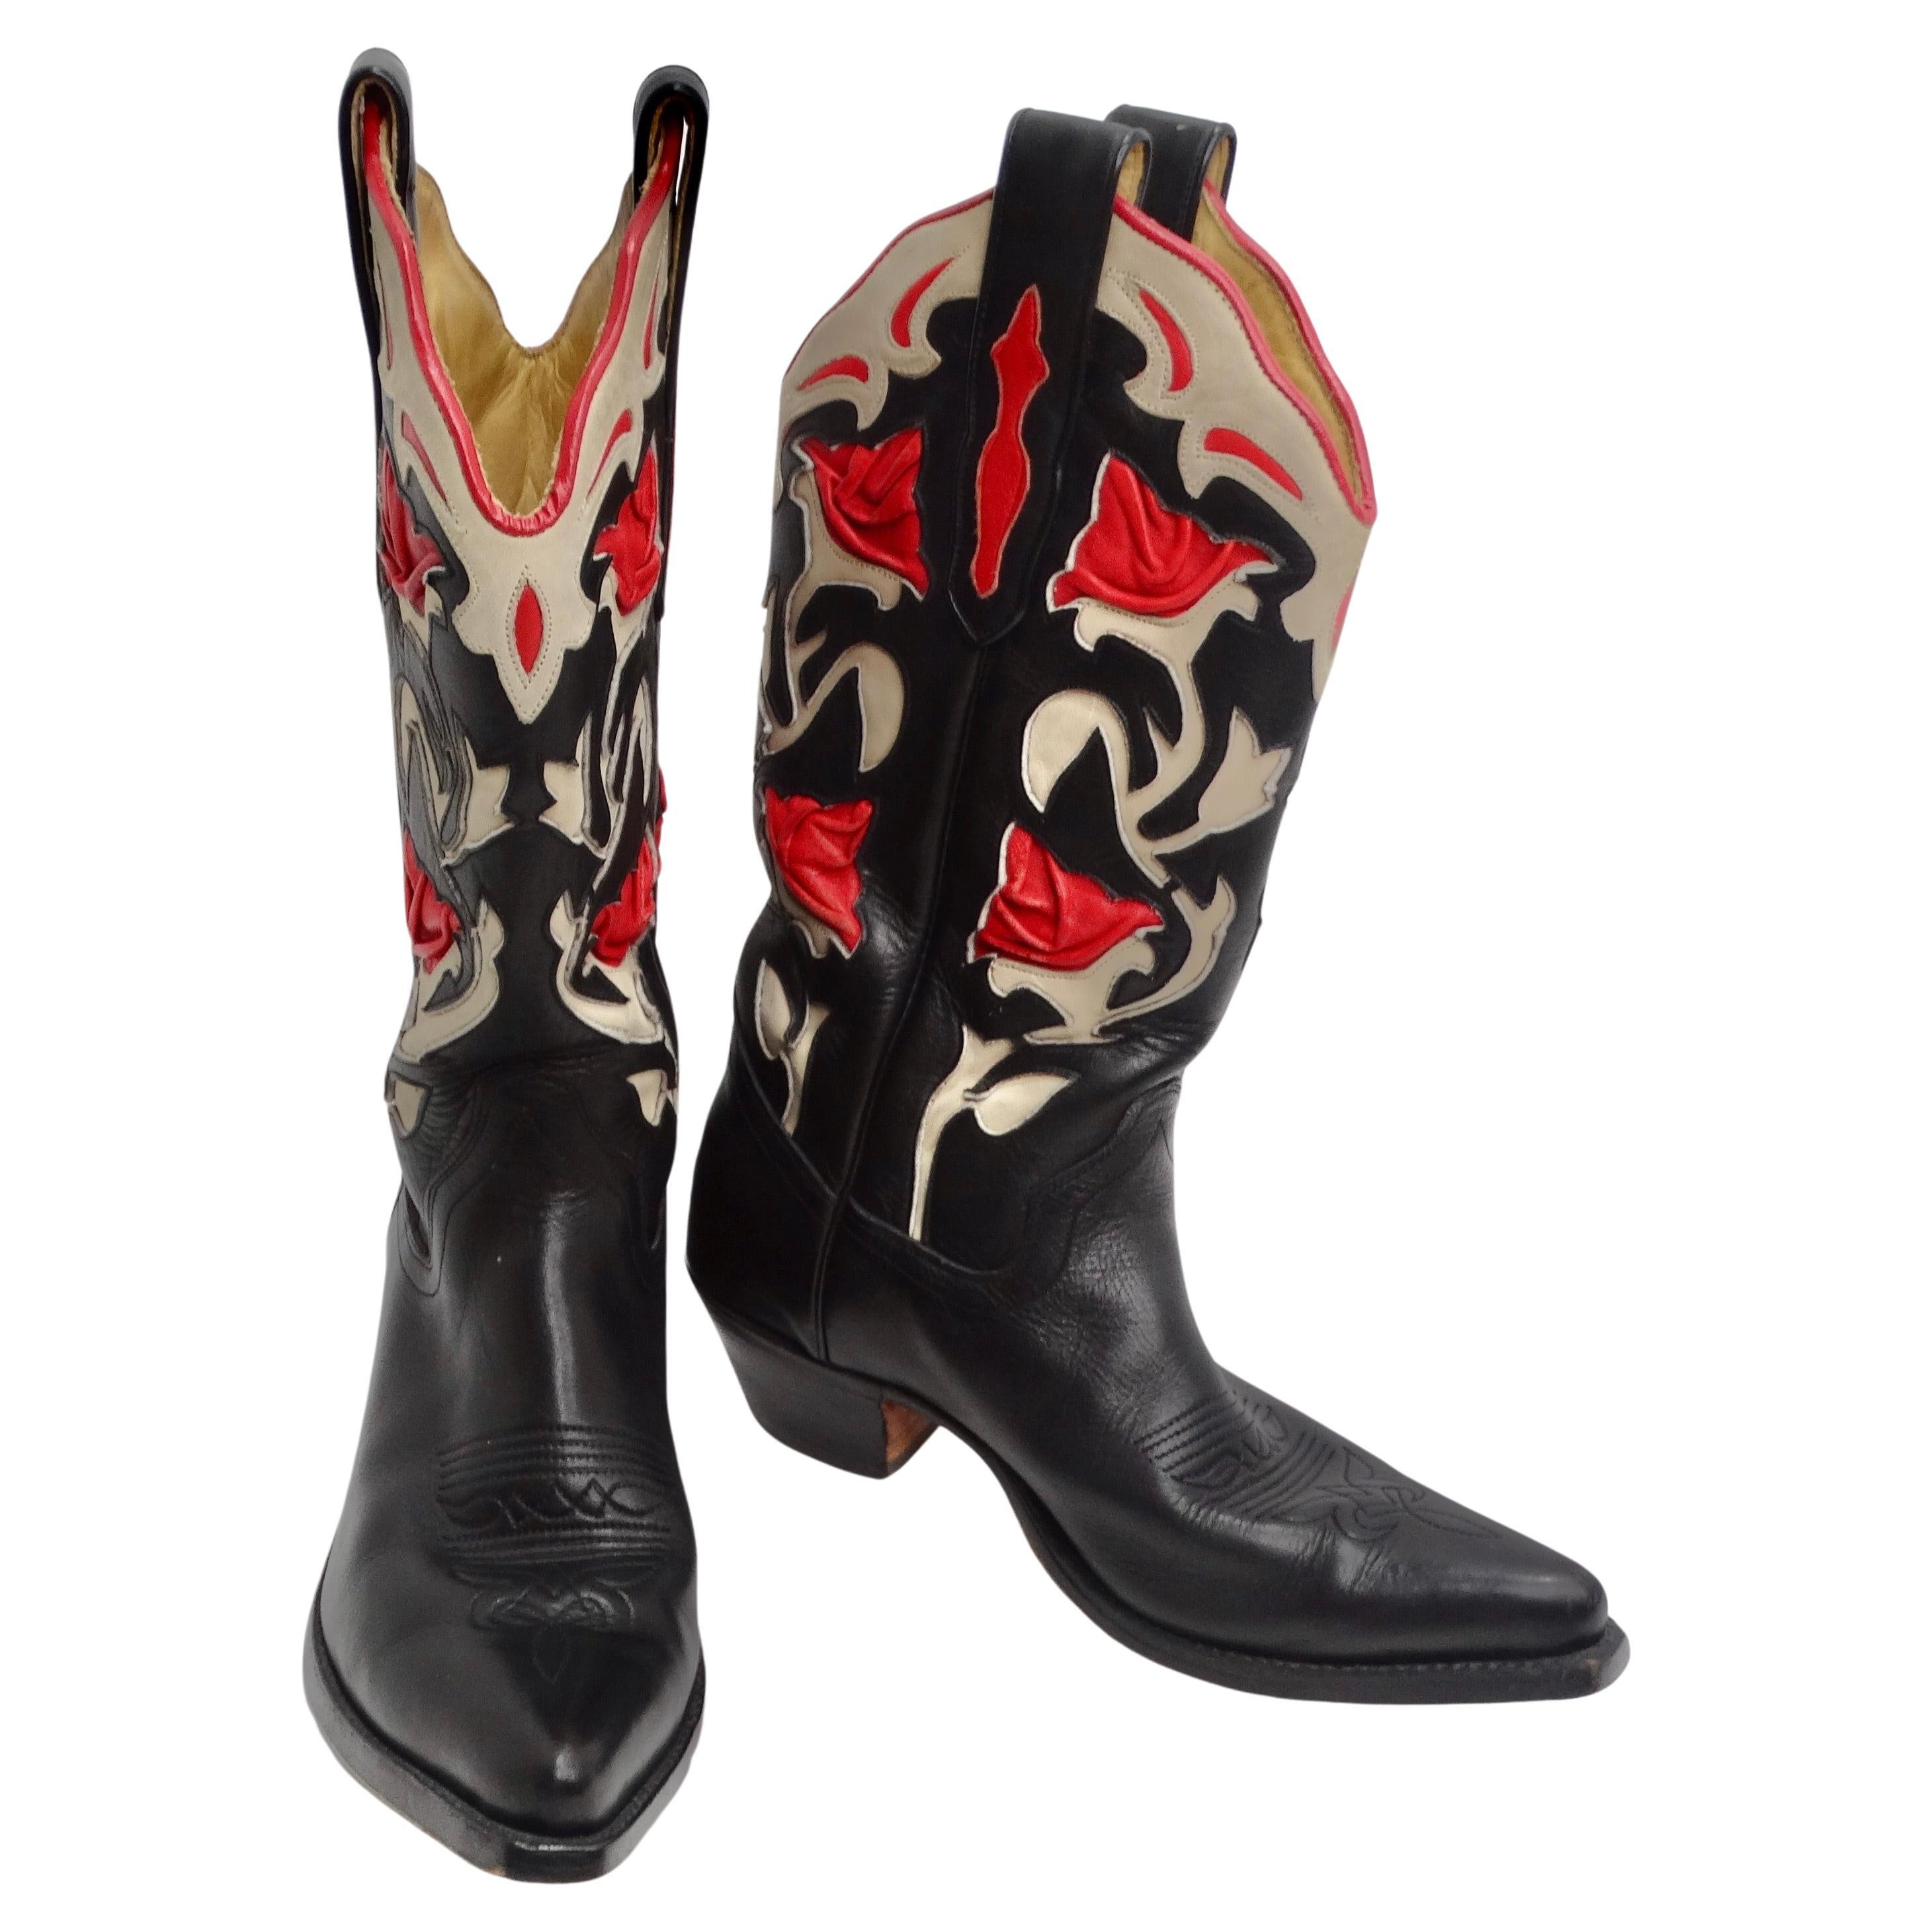 Tony Mora Black and Red Leather Cowboy Boots For Sale